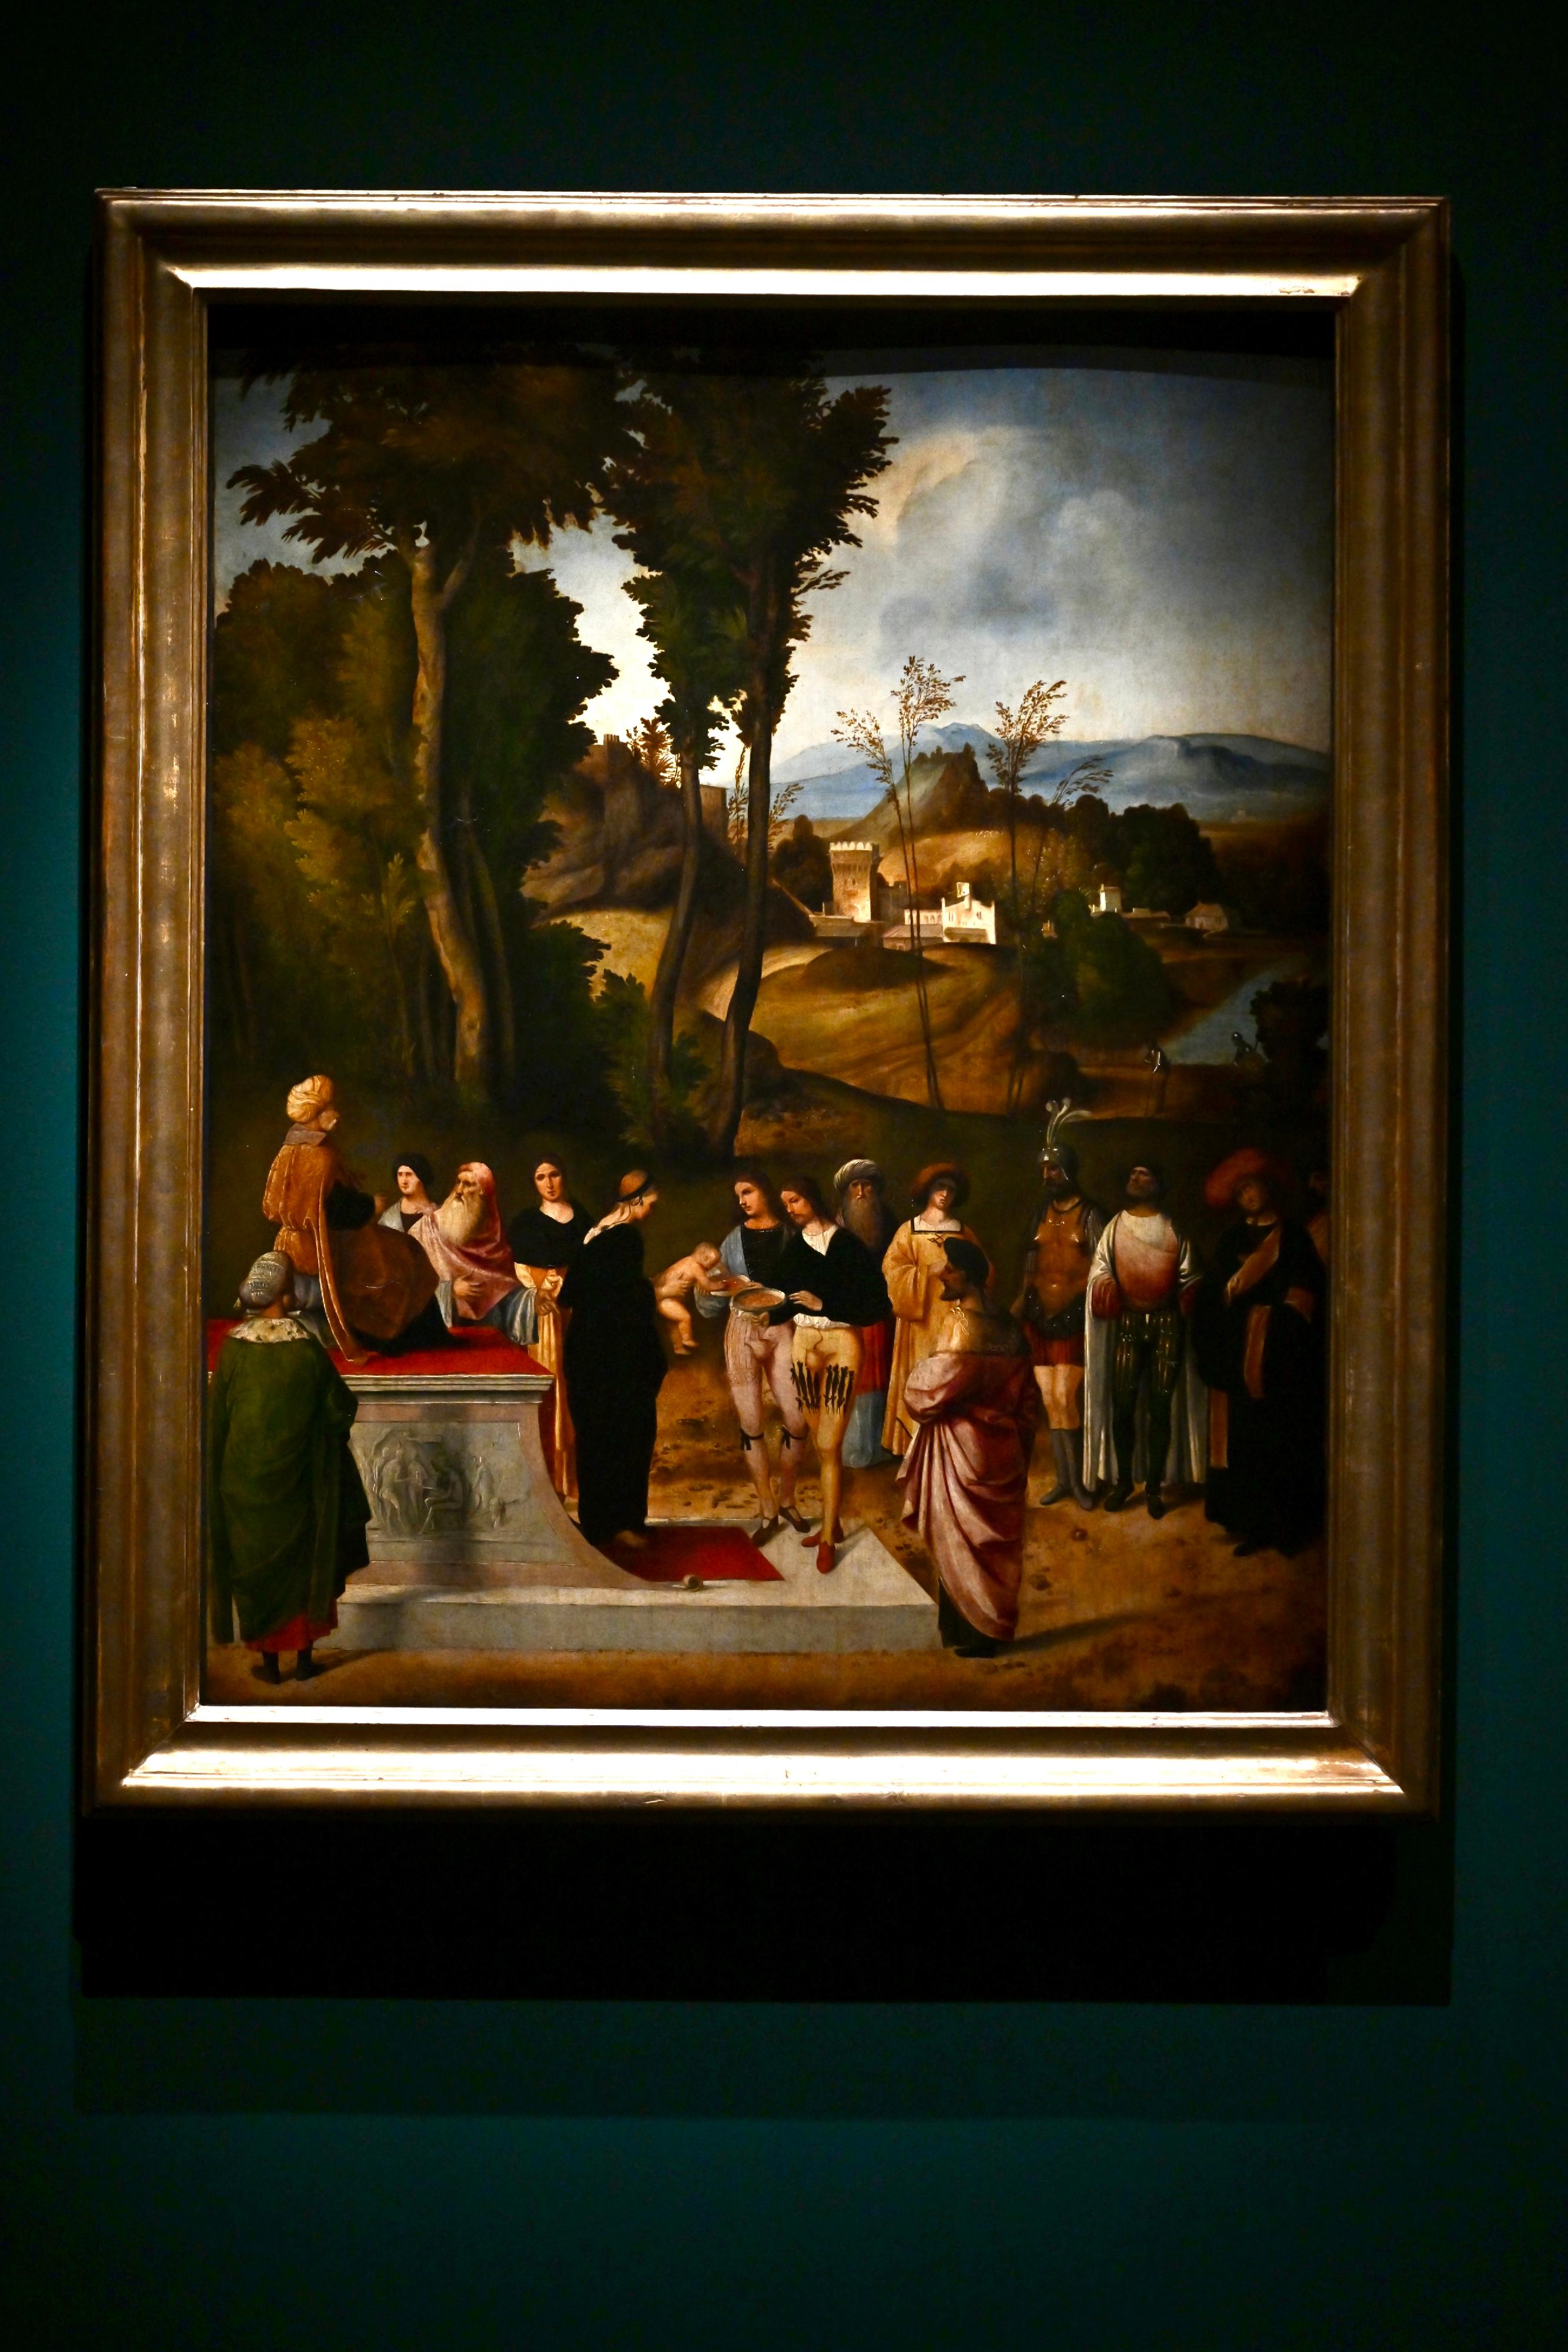  "The Hong Kong Jockey Club Series: Titian and the Venetian Renaissance from the Uffizi" exhibition opens to the public at the Hong Kong Museum of Art from today (November 3). Picture shows Giorgione's "Moses Undergoing Trial by Fire".
